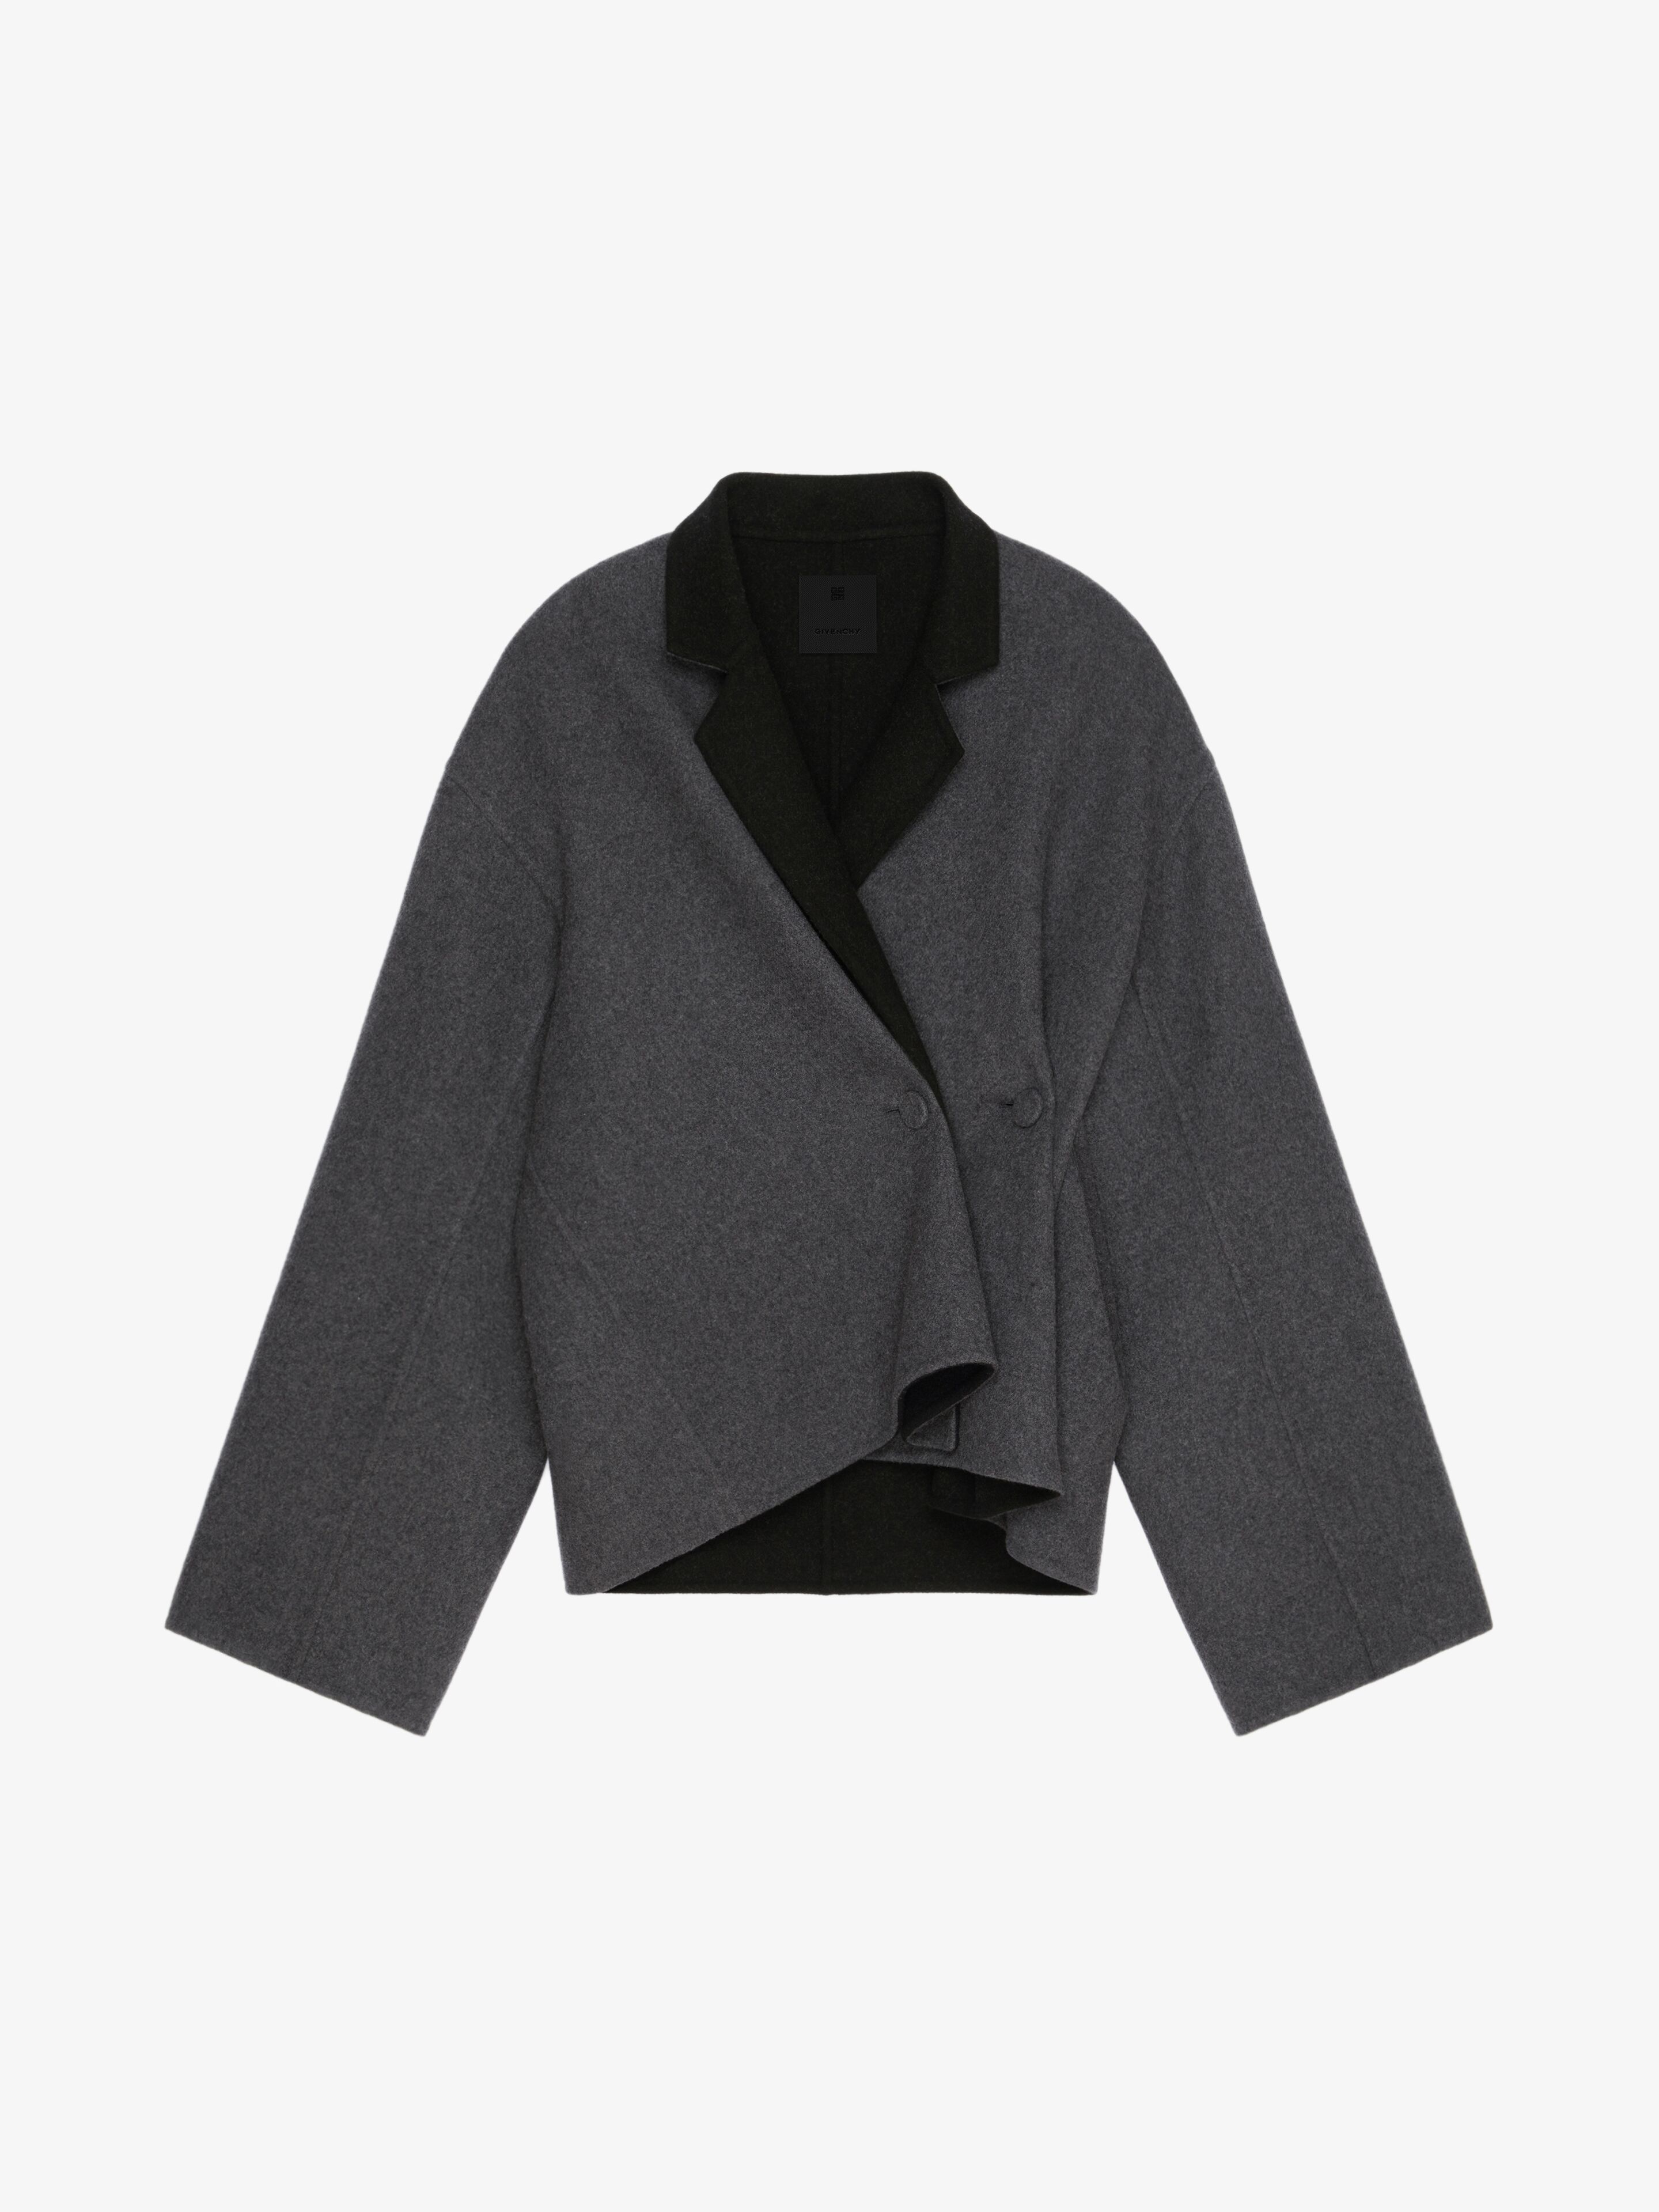 GIVENCHY JACKET IN DOUBLE FACE WOOL AND CASHMERE